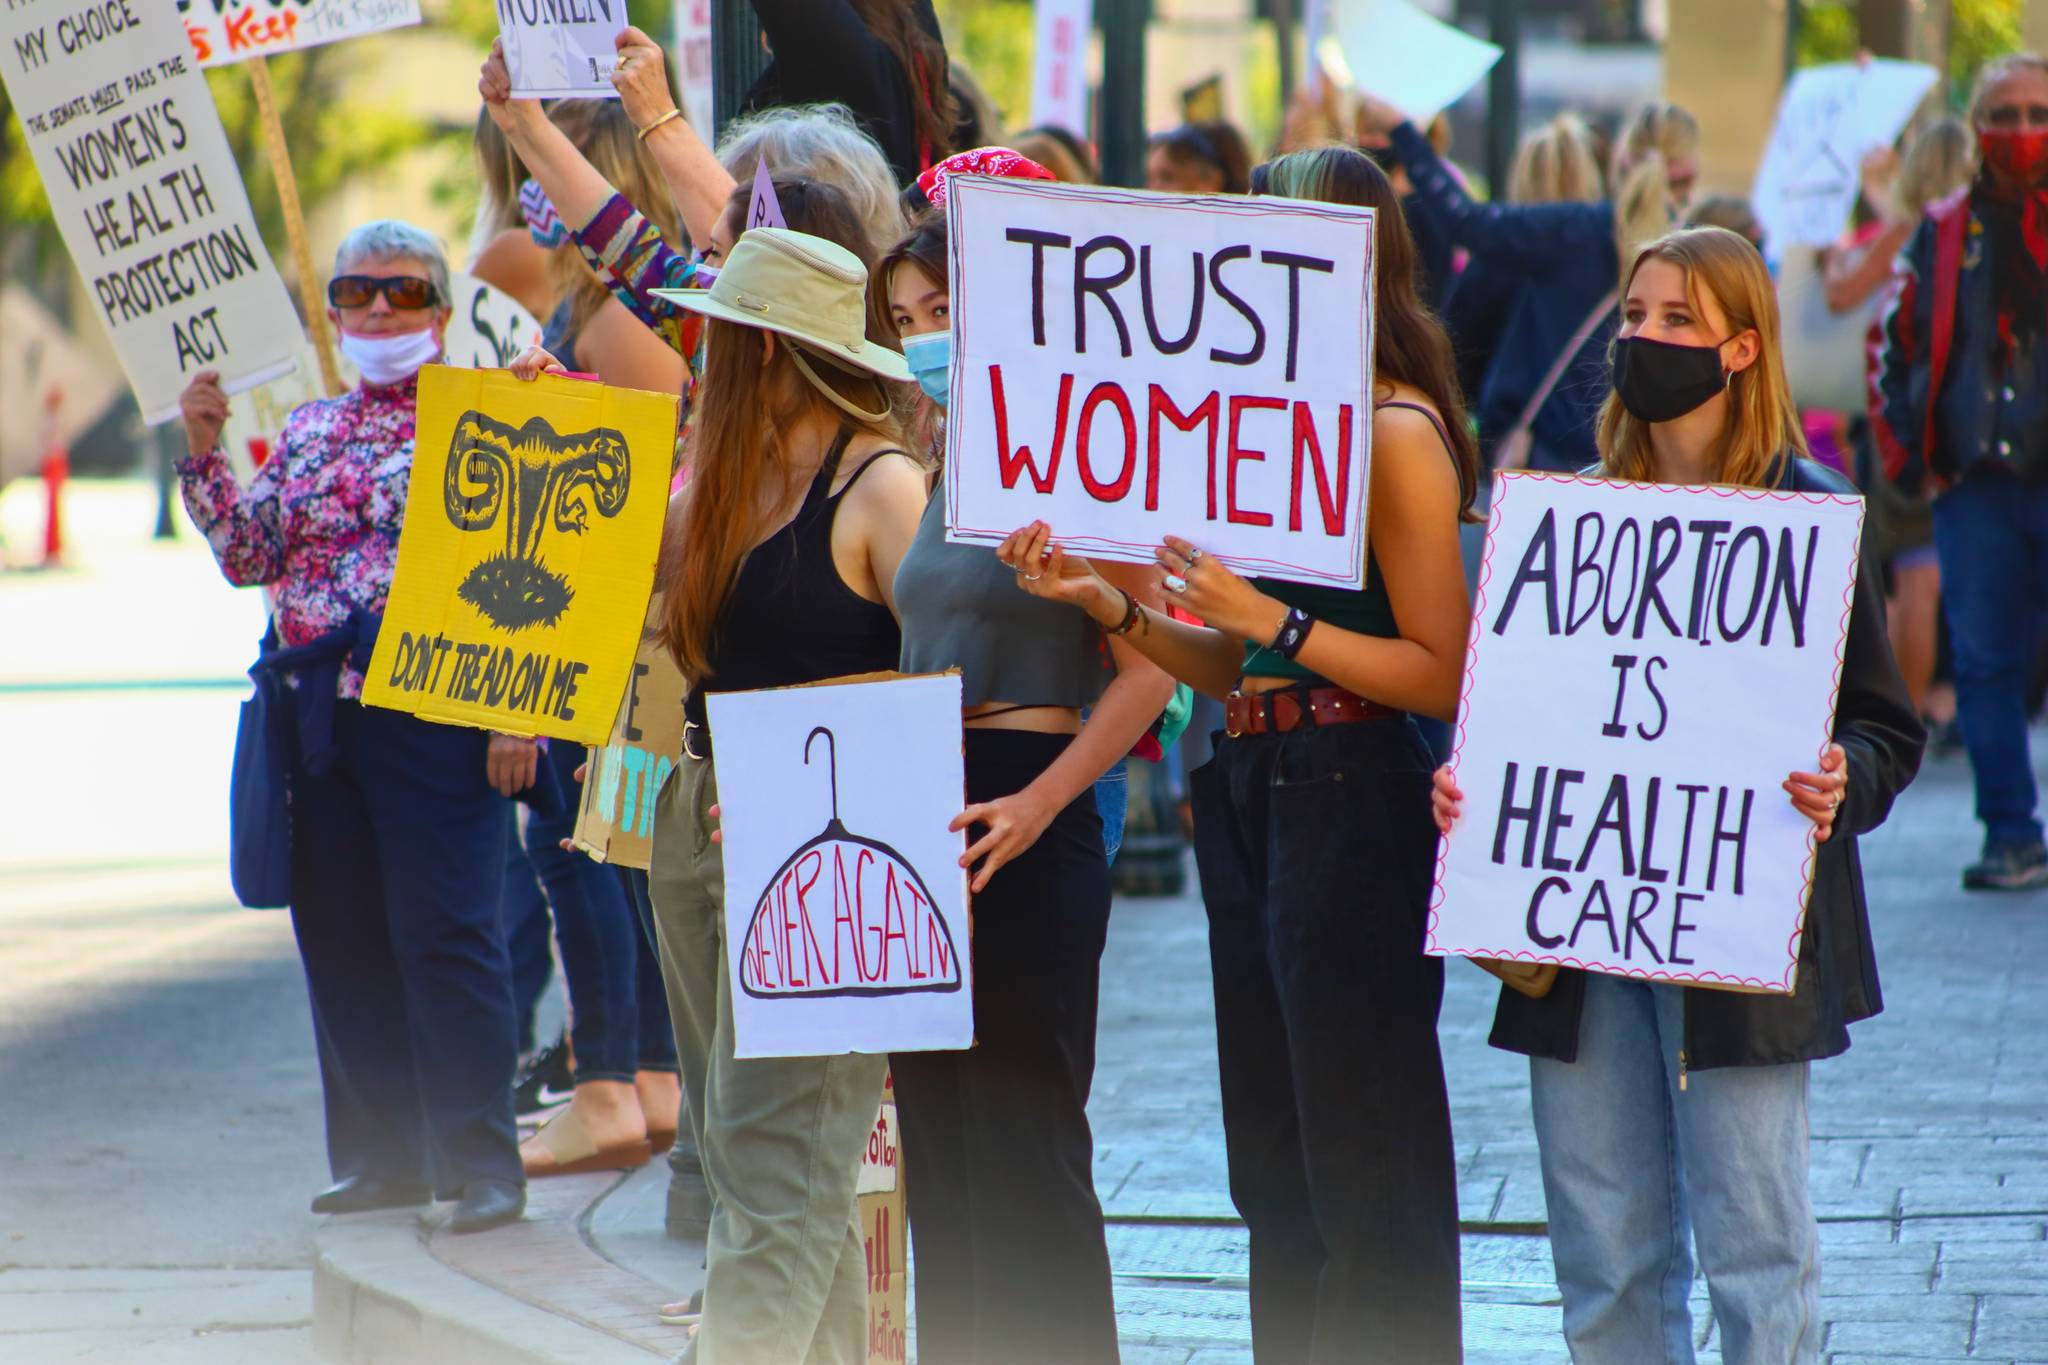 What’s changing in healthcare post-Roe v. Wade?